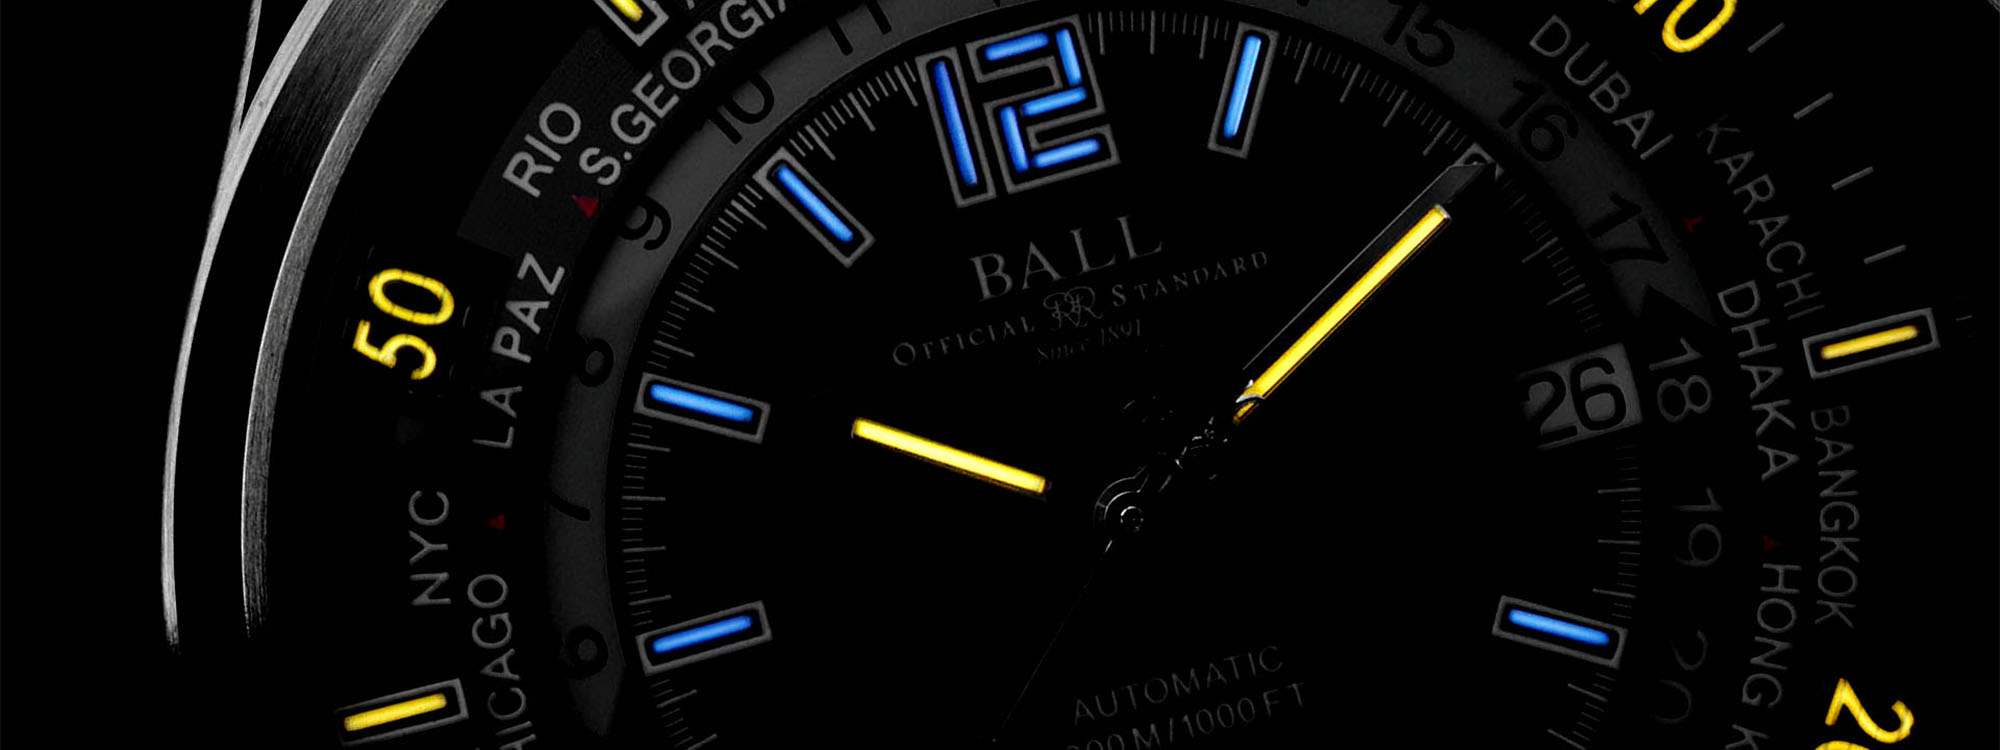 Tritium Watches: How They Work, Why They're Different, and Which Brands Still Make Them